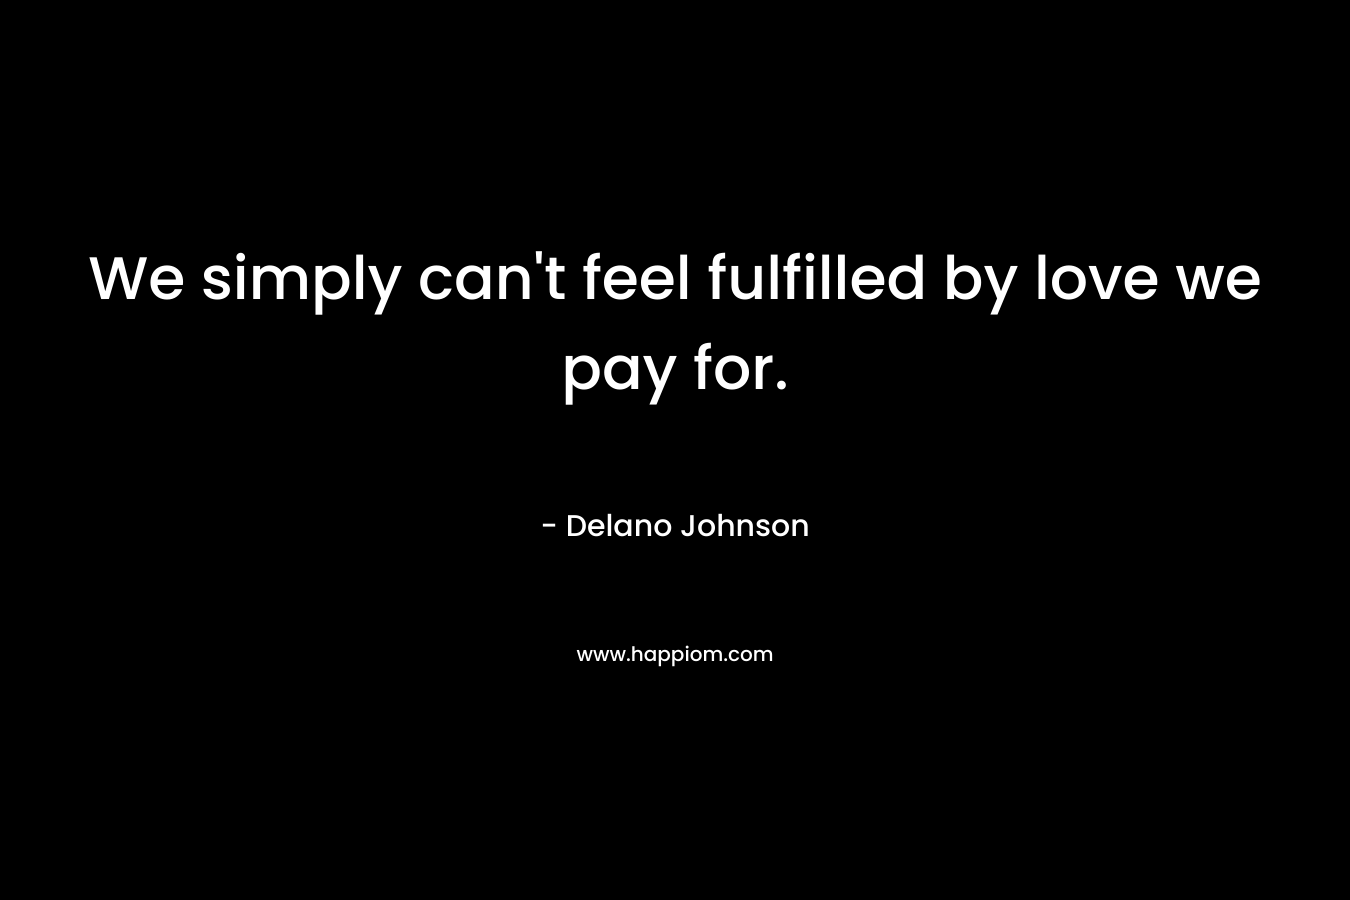 We simply can't feel fulfilled by love we pay for.